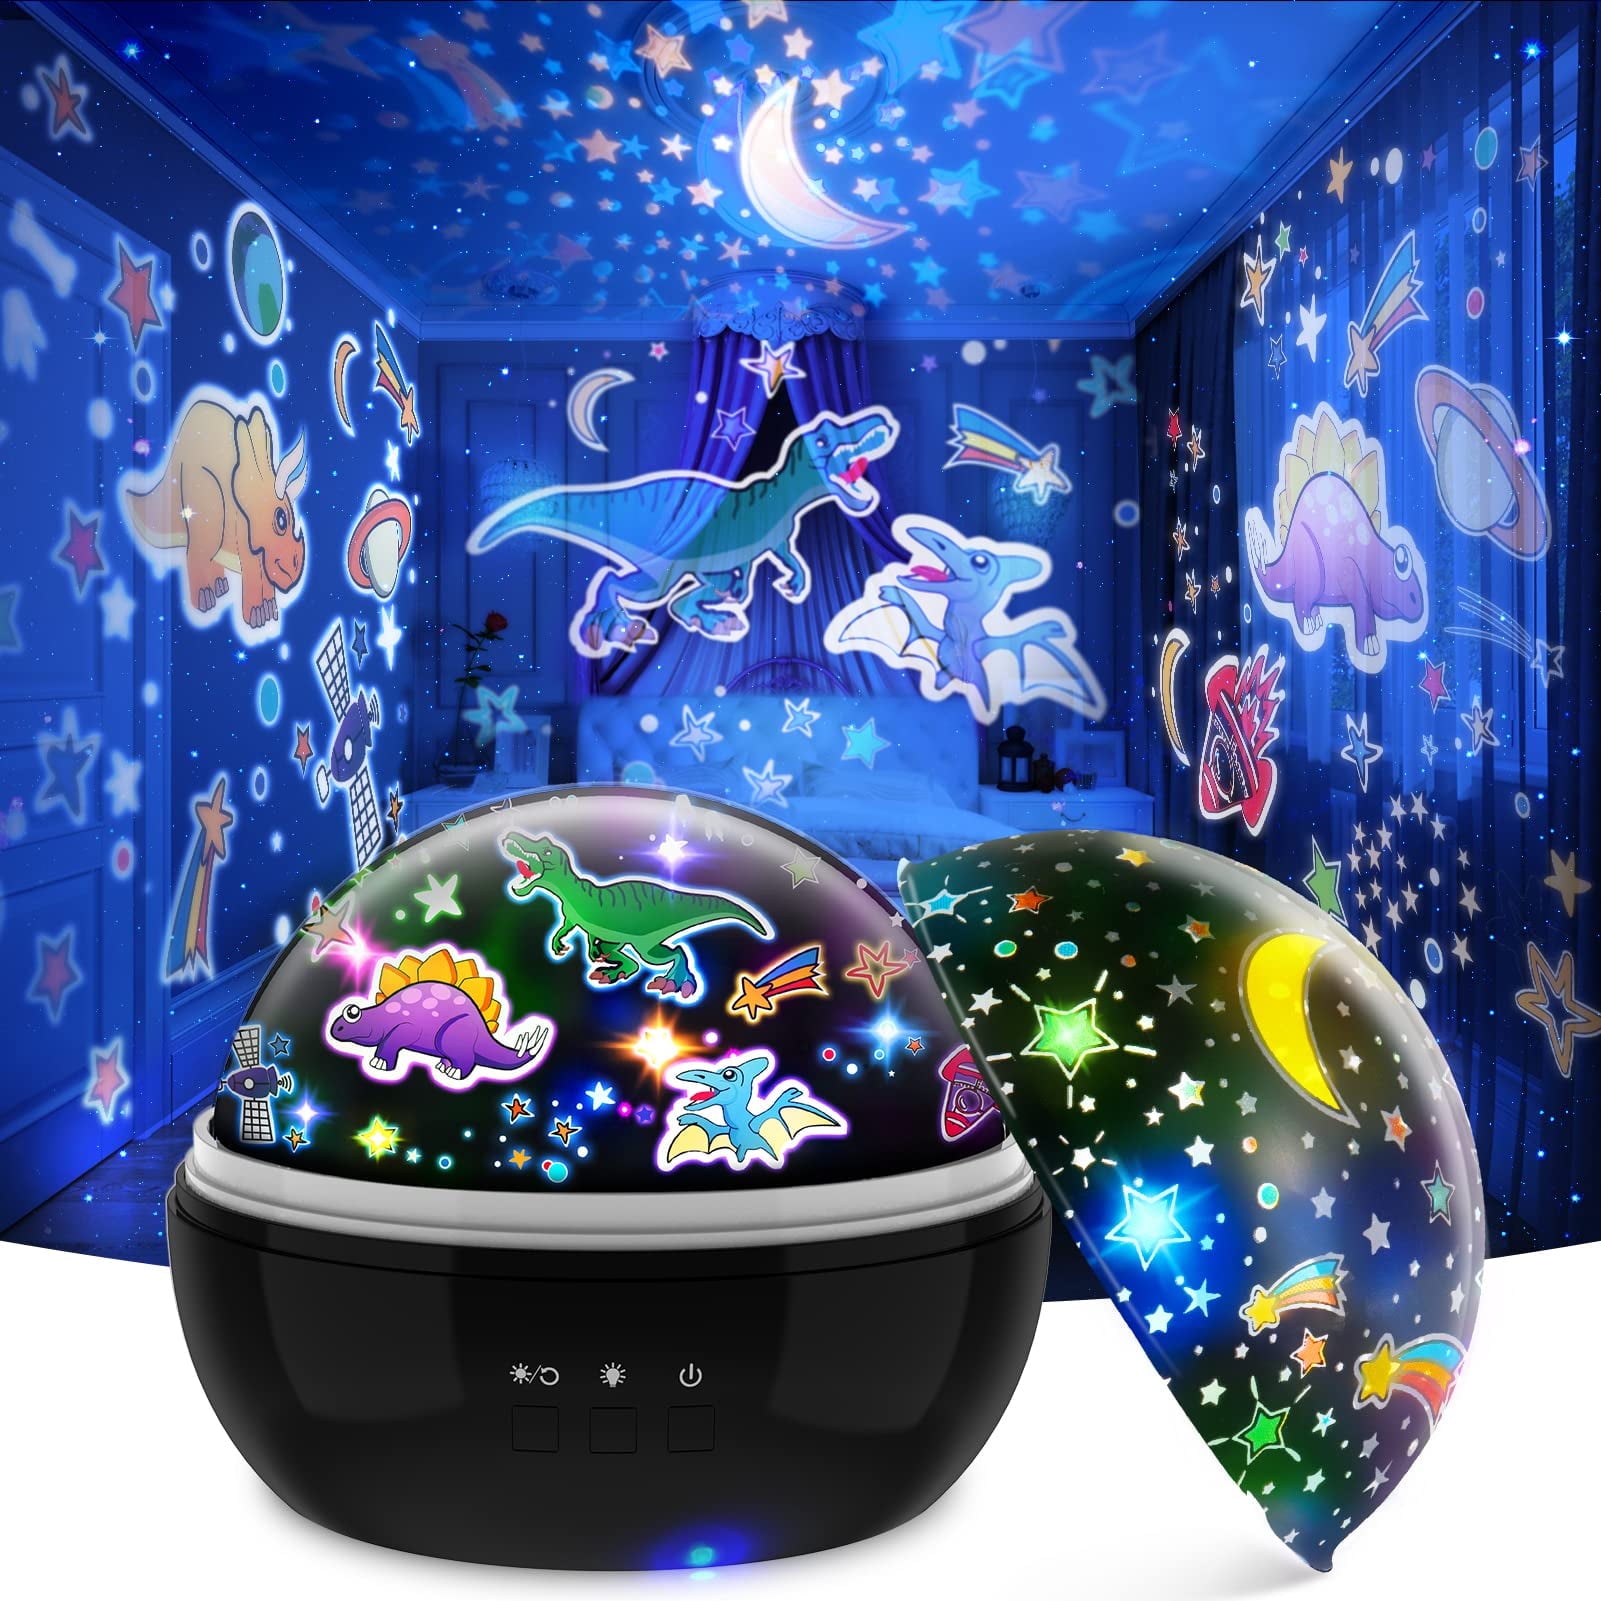 Atopdream Star Projector Night Light, mulitcolor Galaxy, Music Remote Control Projector for Birthday, Christmas Gifts for Kids Adult, Size: Star-2, Black